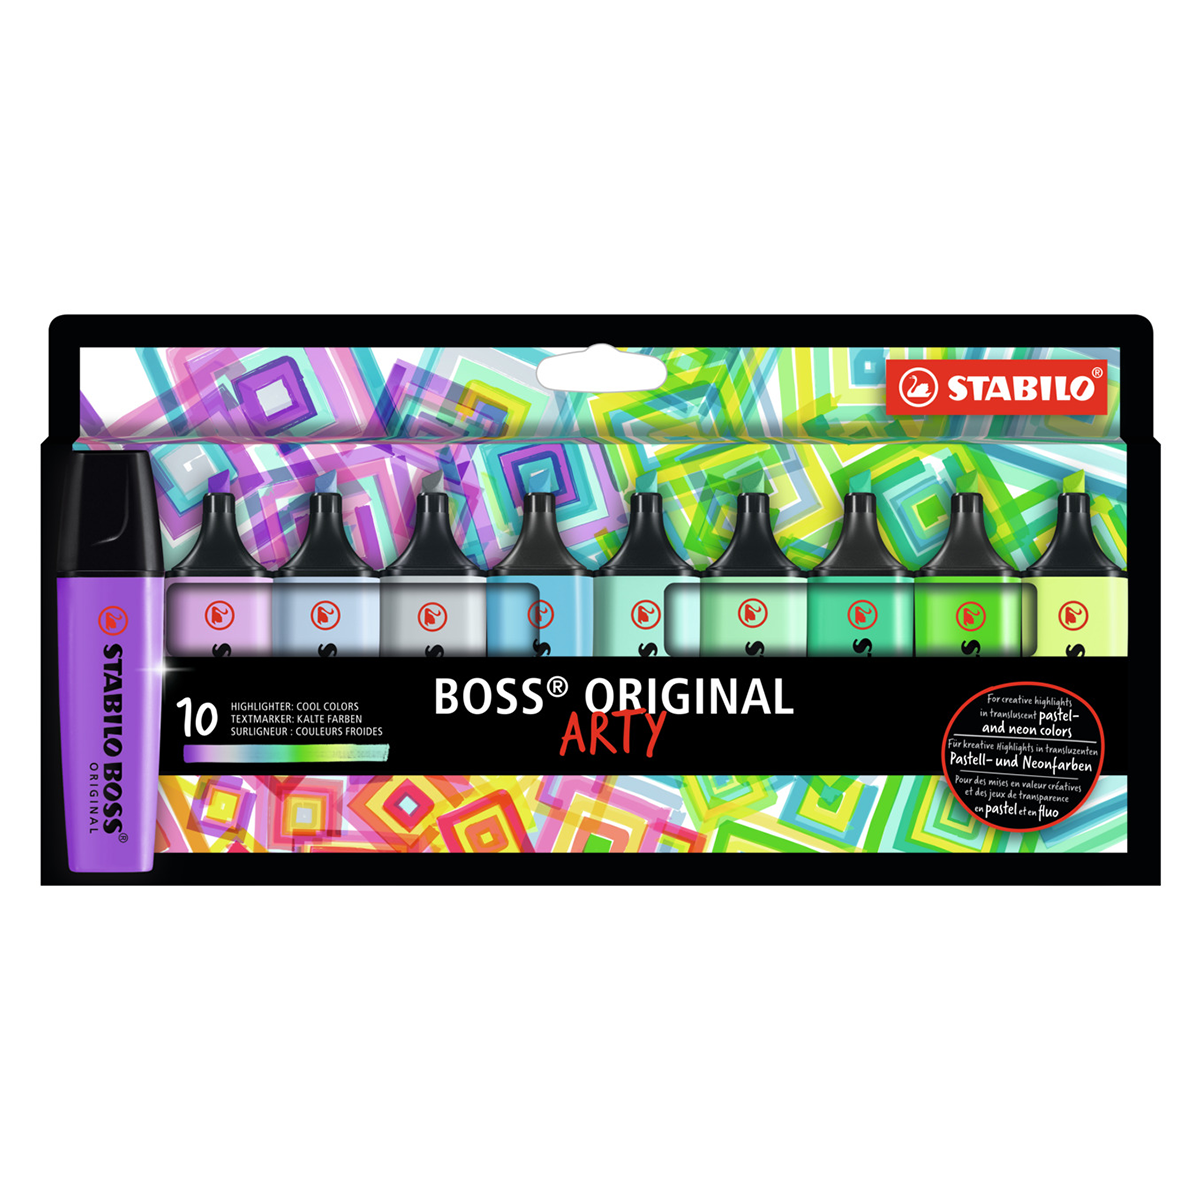  Highlighter - STABILO BOSS Original Arty - Deskset of 23 -  Assorted Colors : Office Products